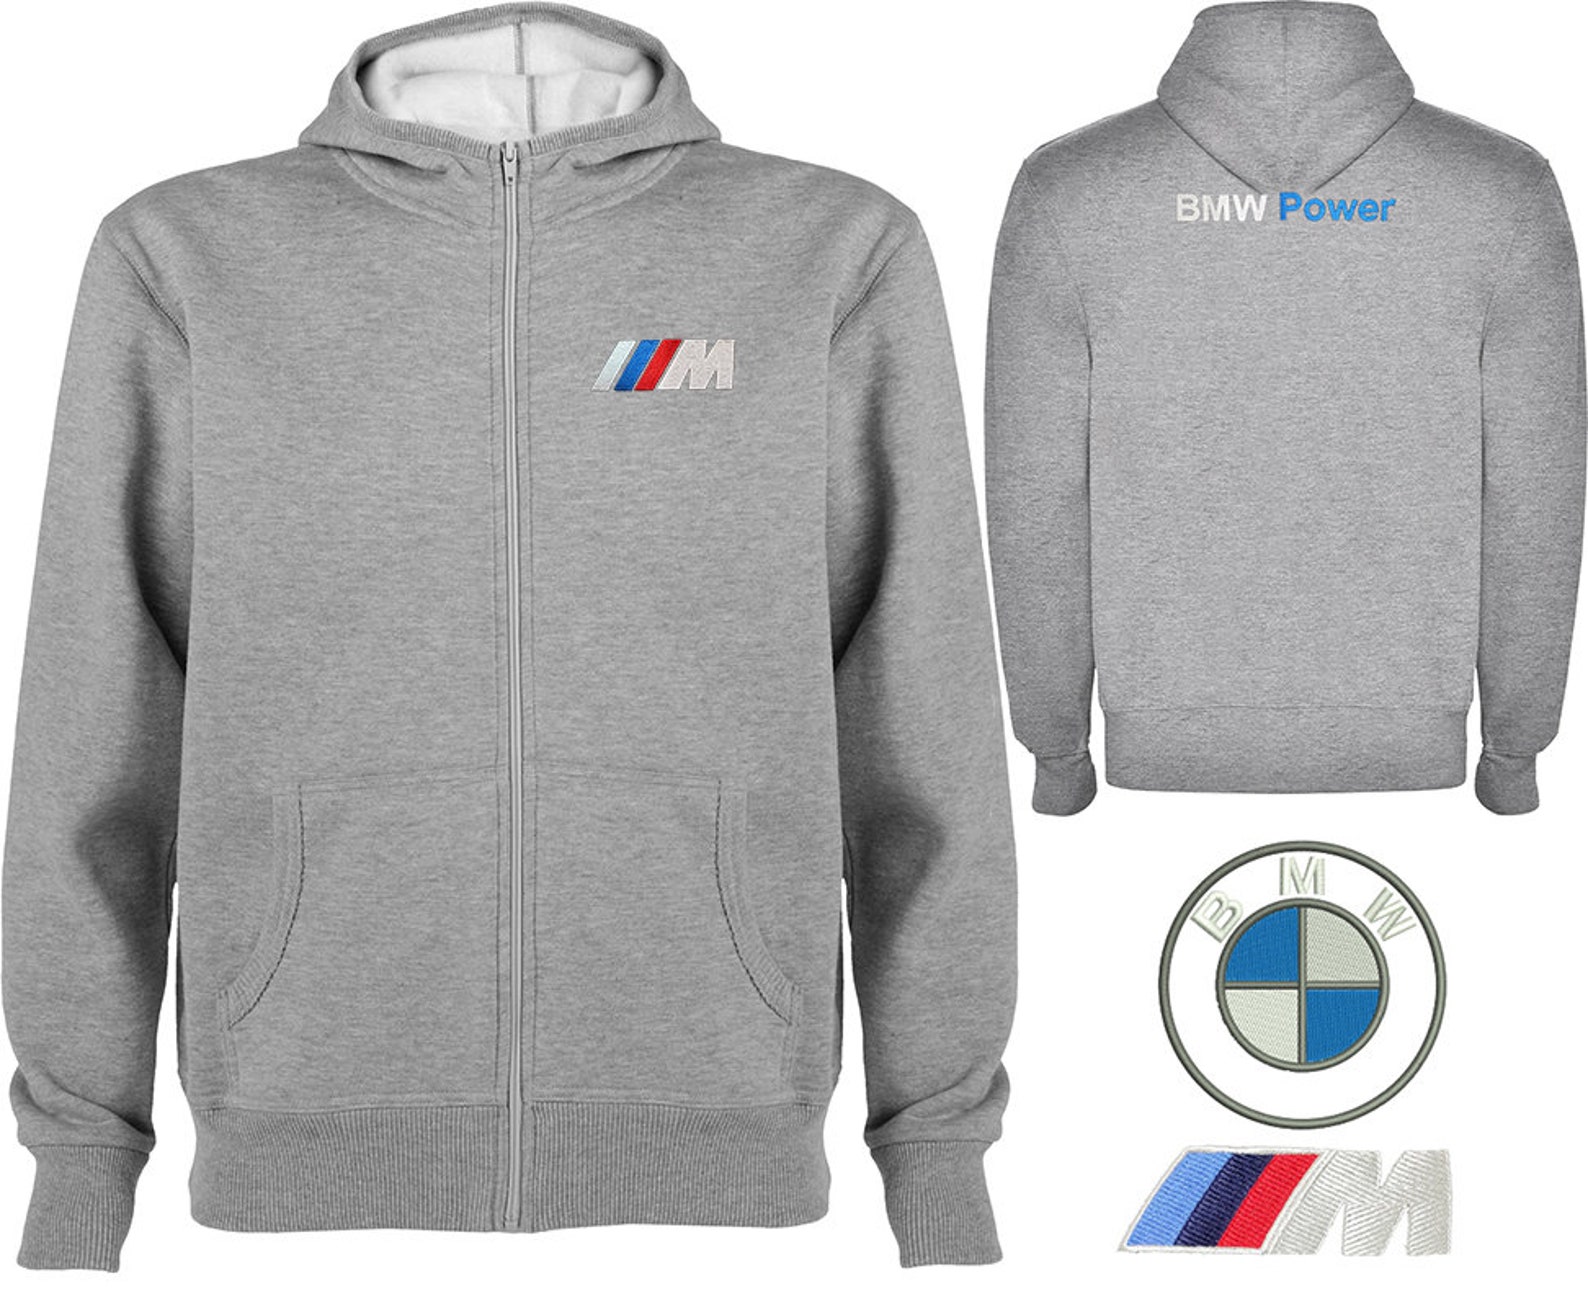 Embroidered BMW M-power Logo on Sweat Hooded Fleece Jacket - Etsy